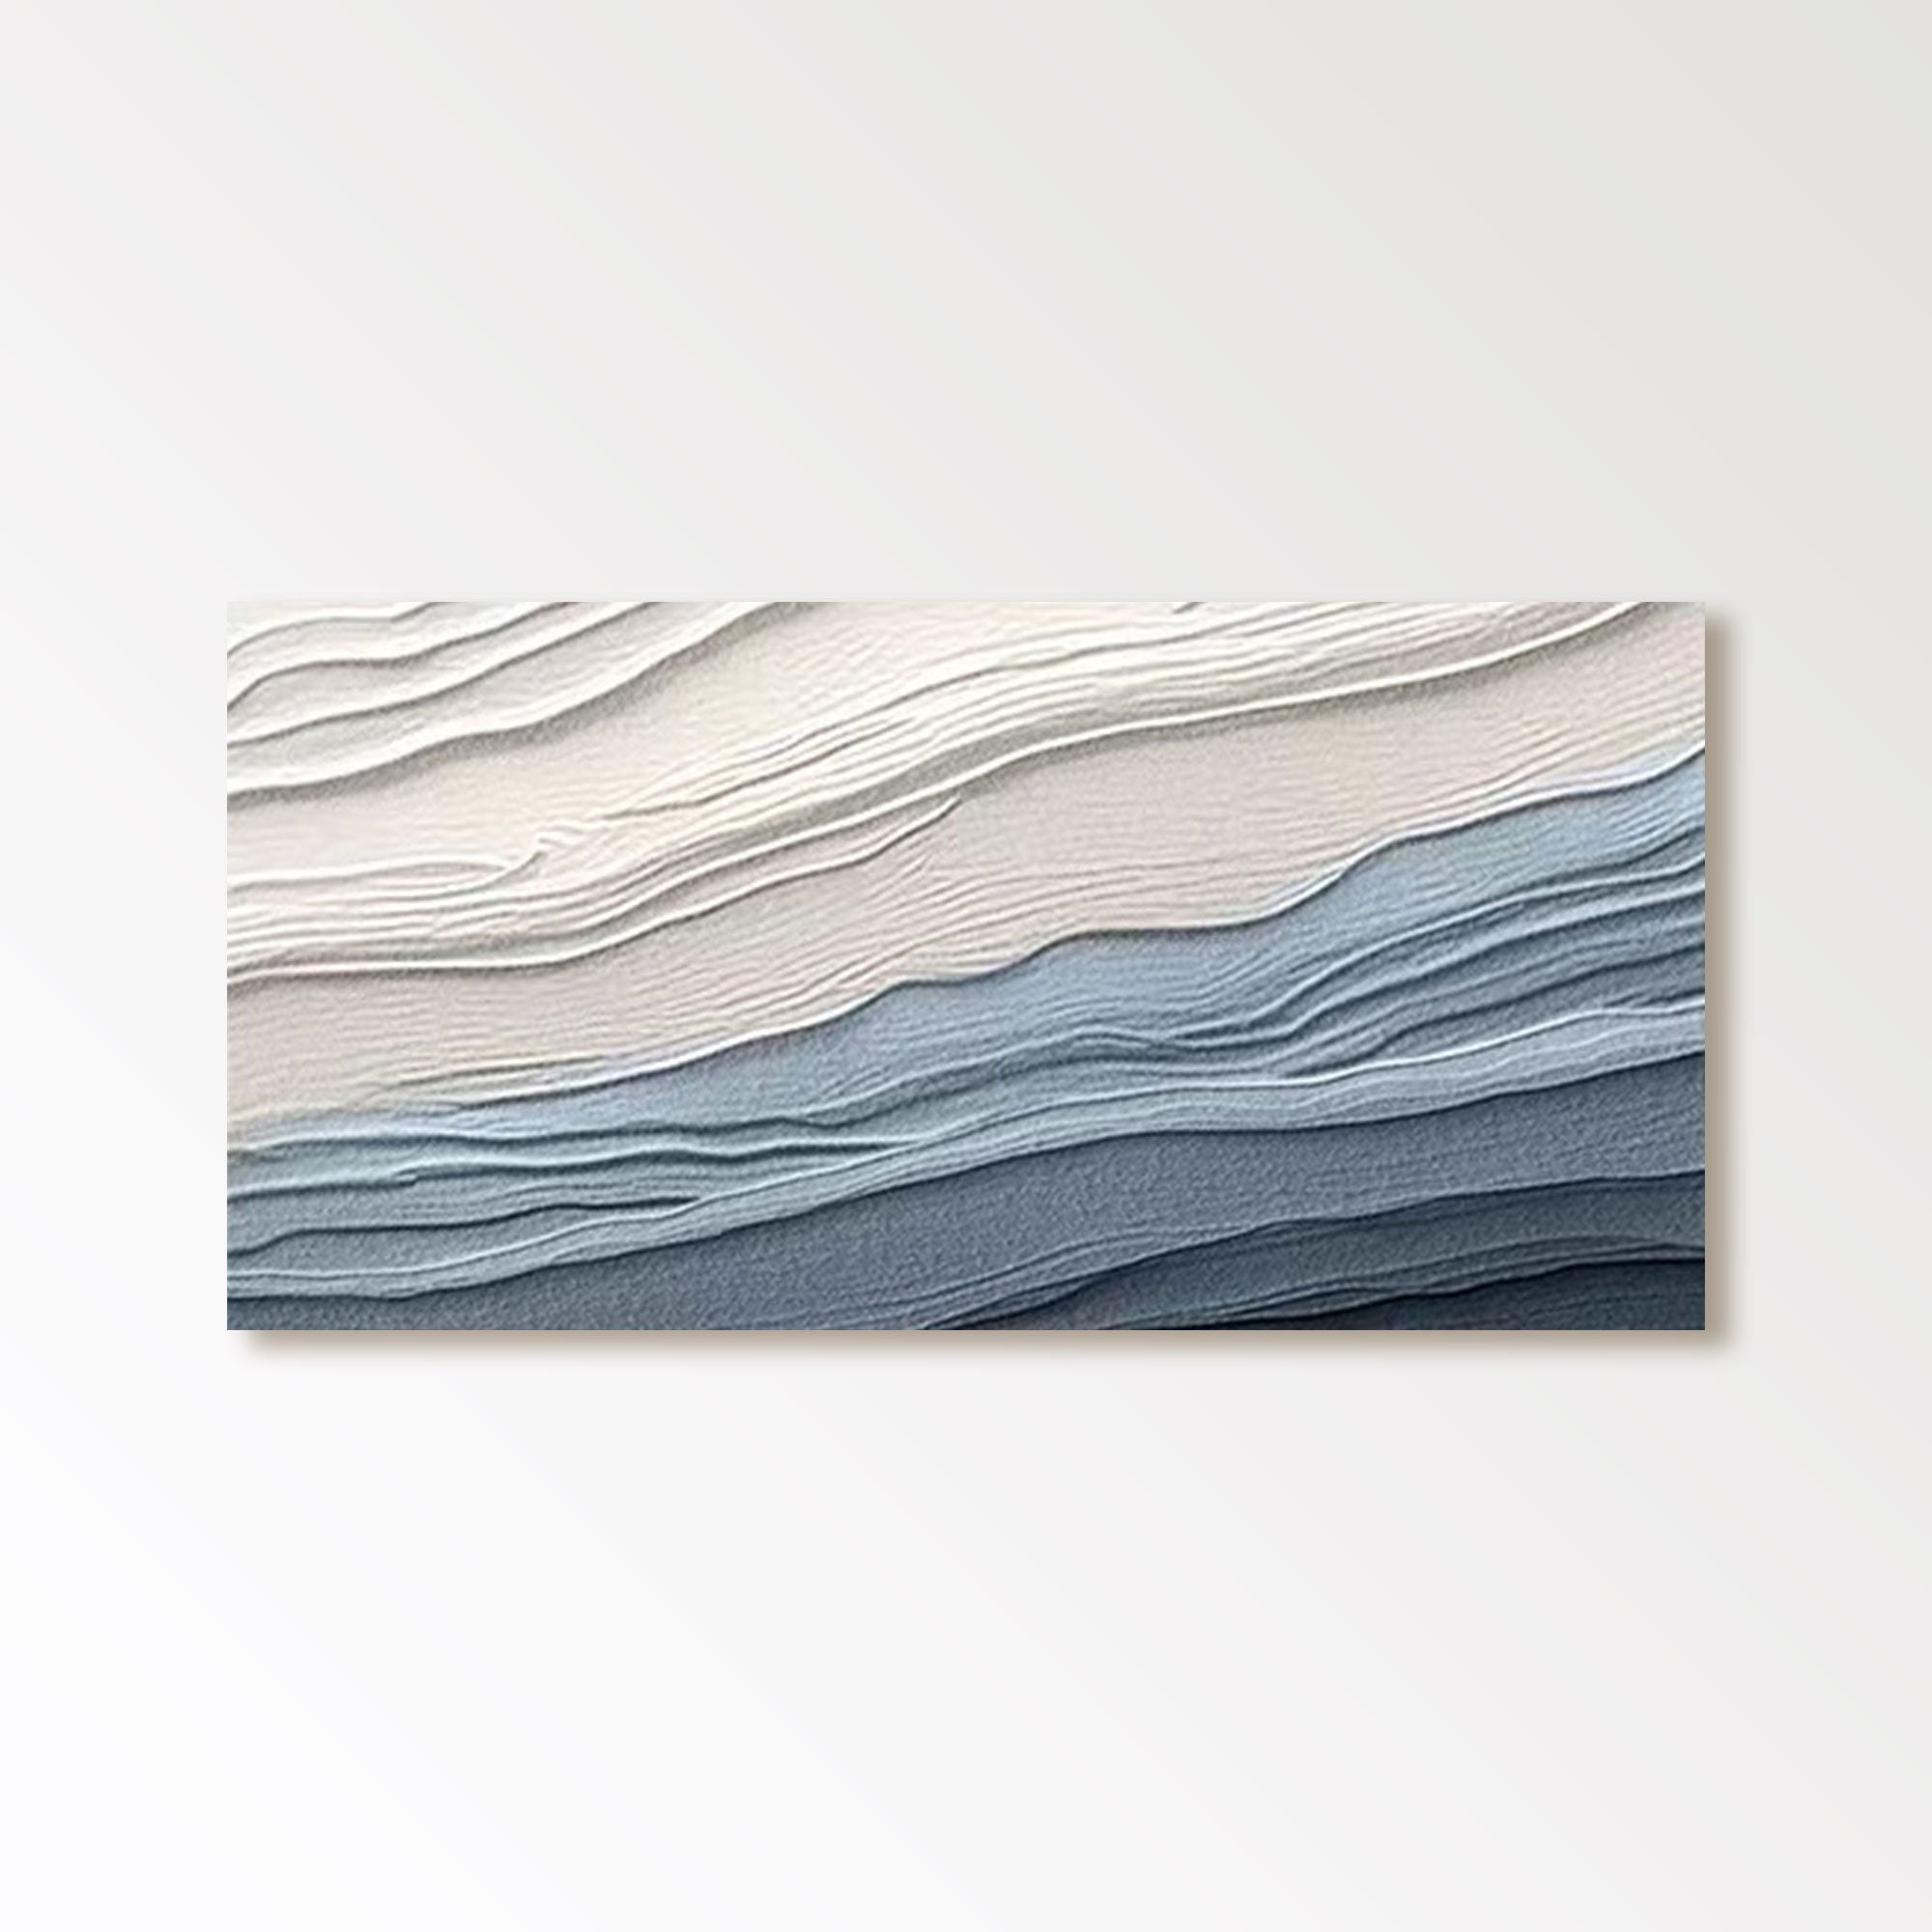 3D Textured Abstract Painting "Serenity Waves"